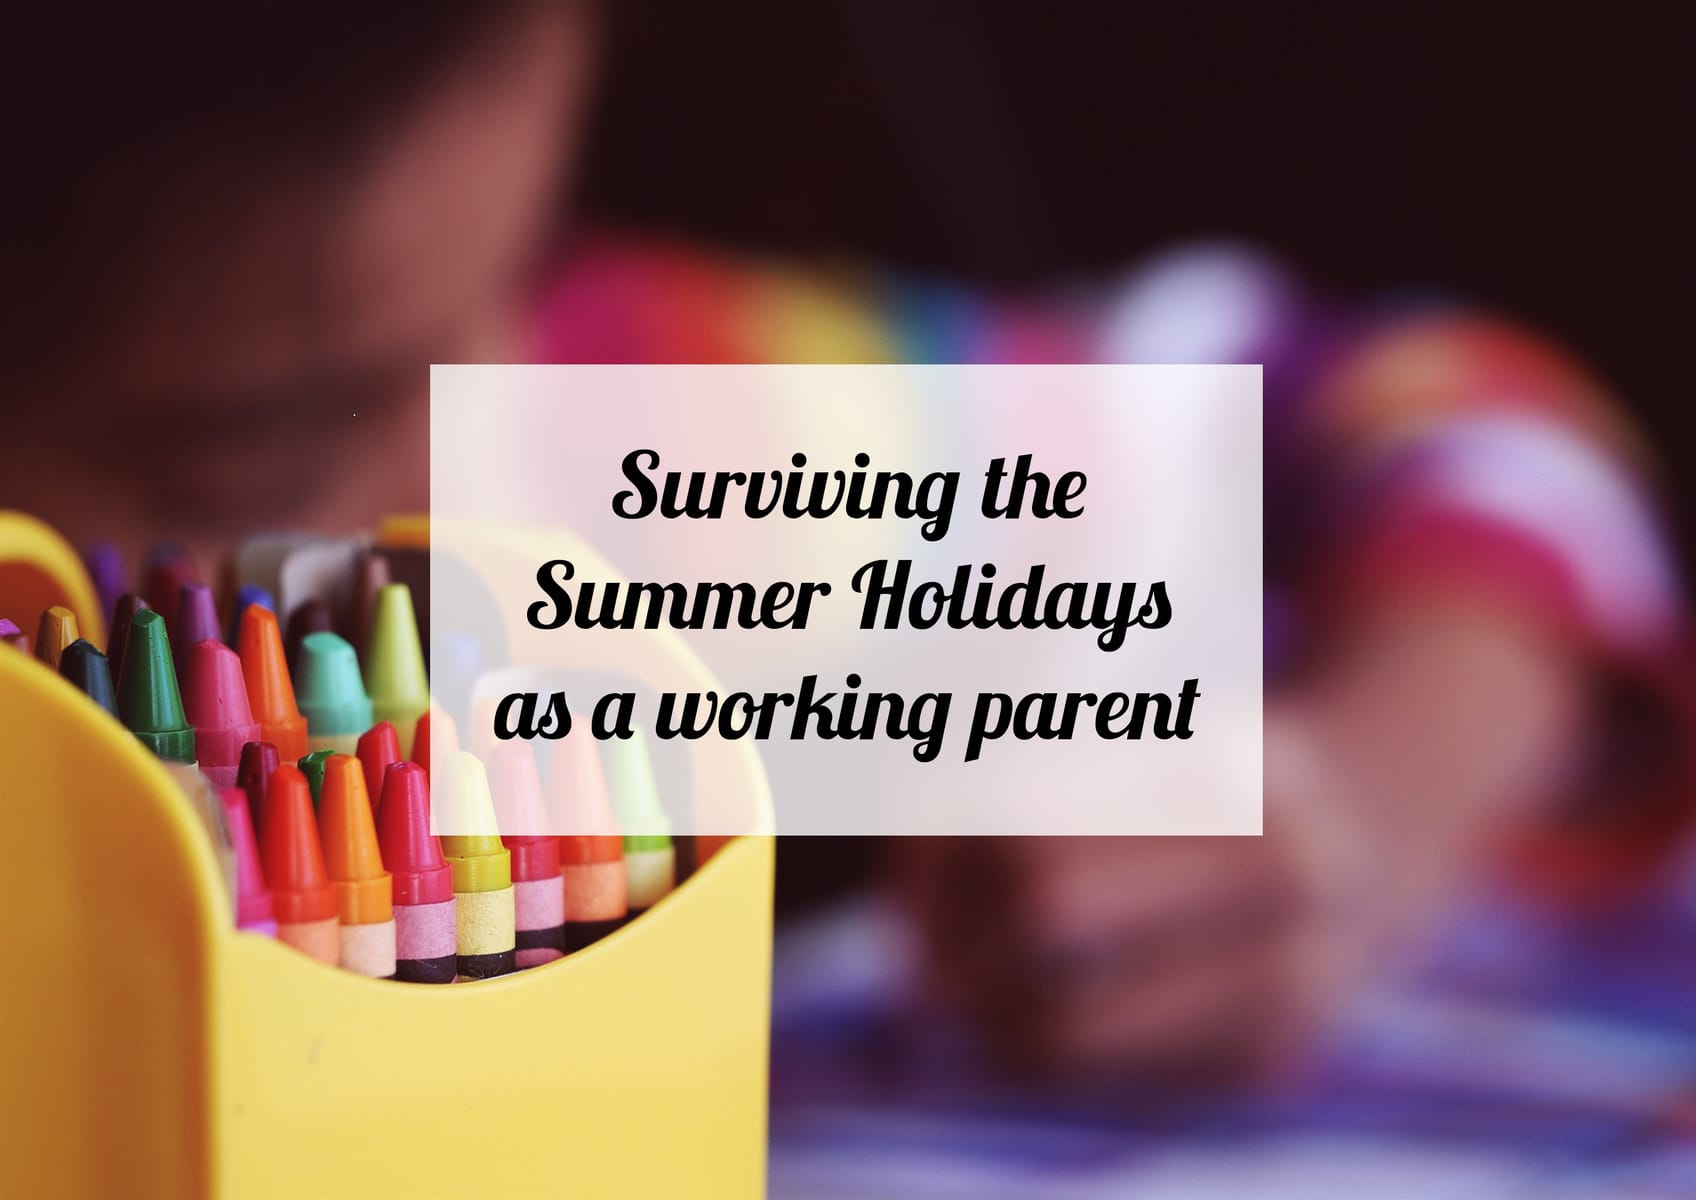 Surviving the Summer Holidays as a working parent